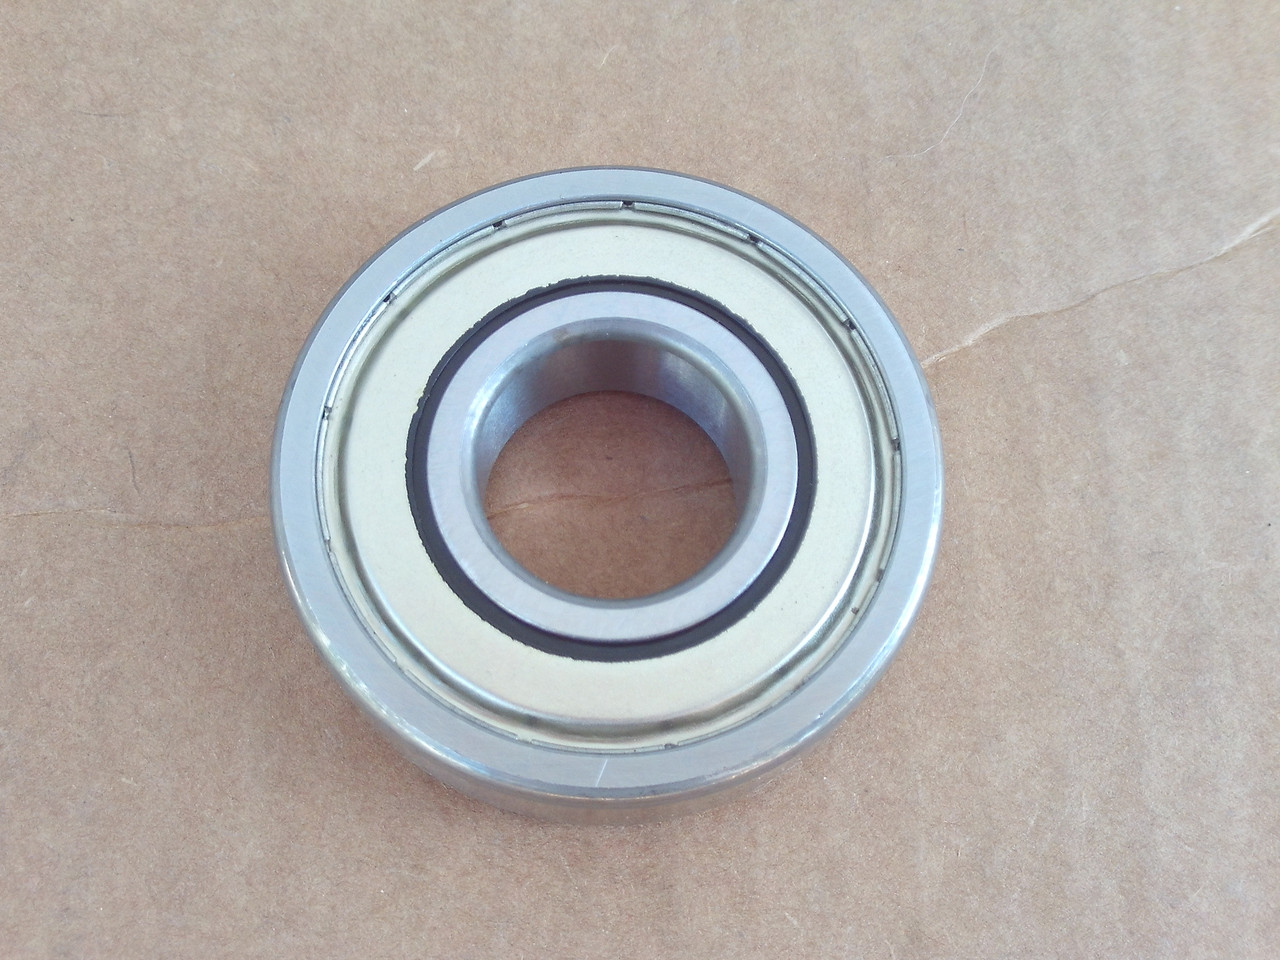 Spindle Bearing for Wright Mfg 17146017, 71460017 ID: 0.984"= 1" OD: 2.44"= 2-3/8" Height: 0.669= 5/8"